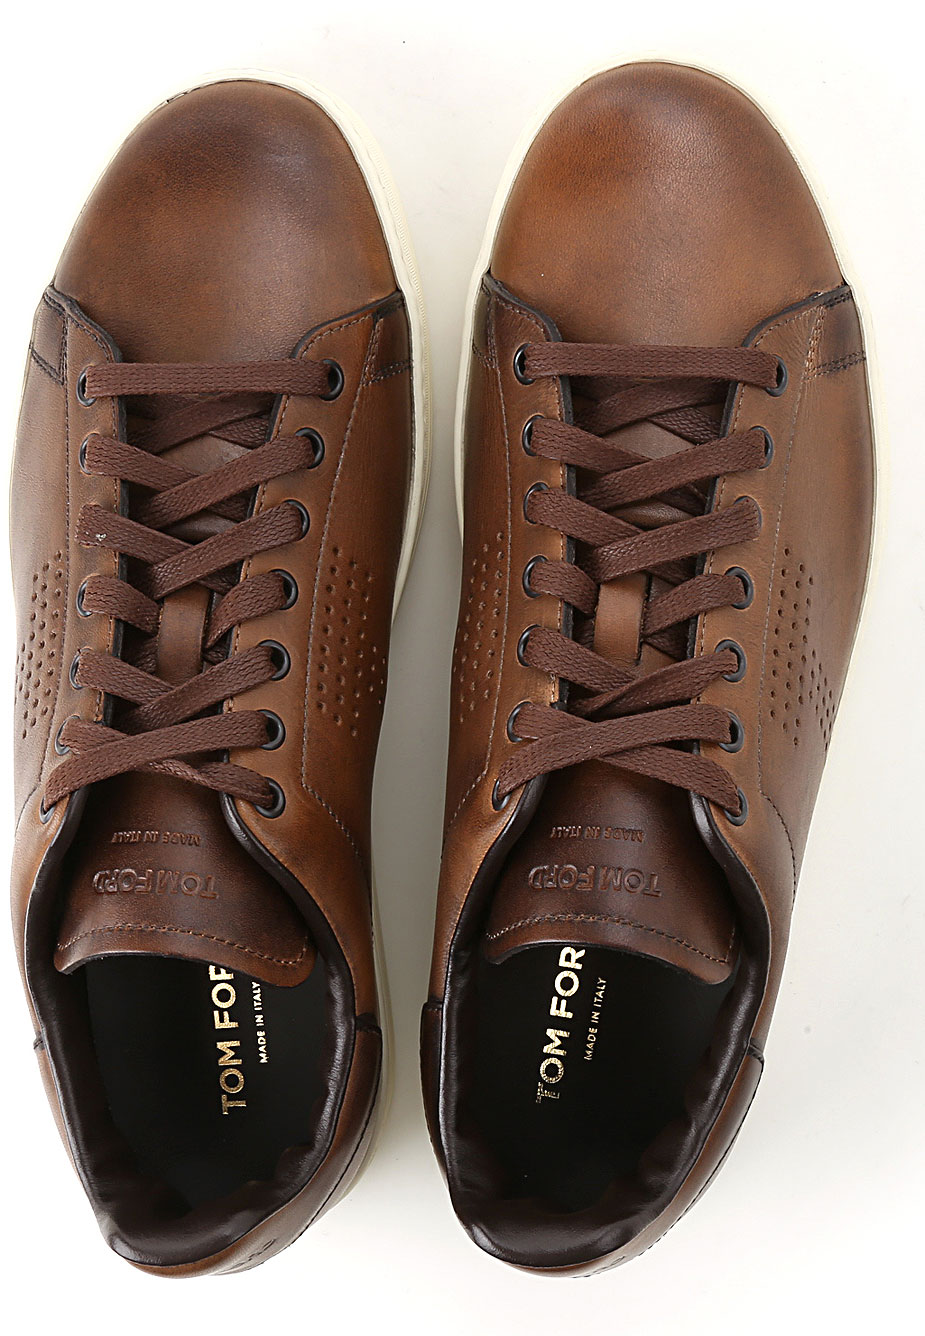 Chaussures Homme Tom Ford, Code produit: j1045t-vcl-sir